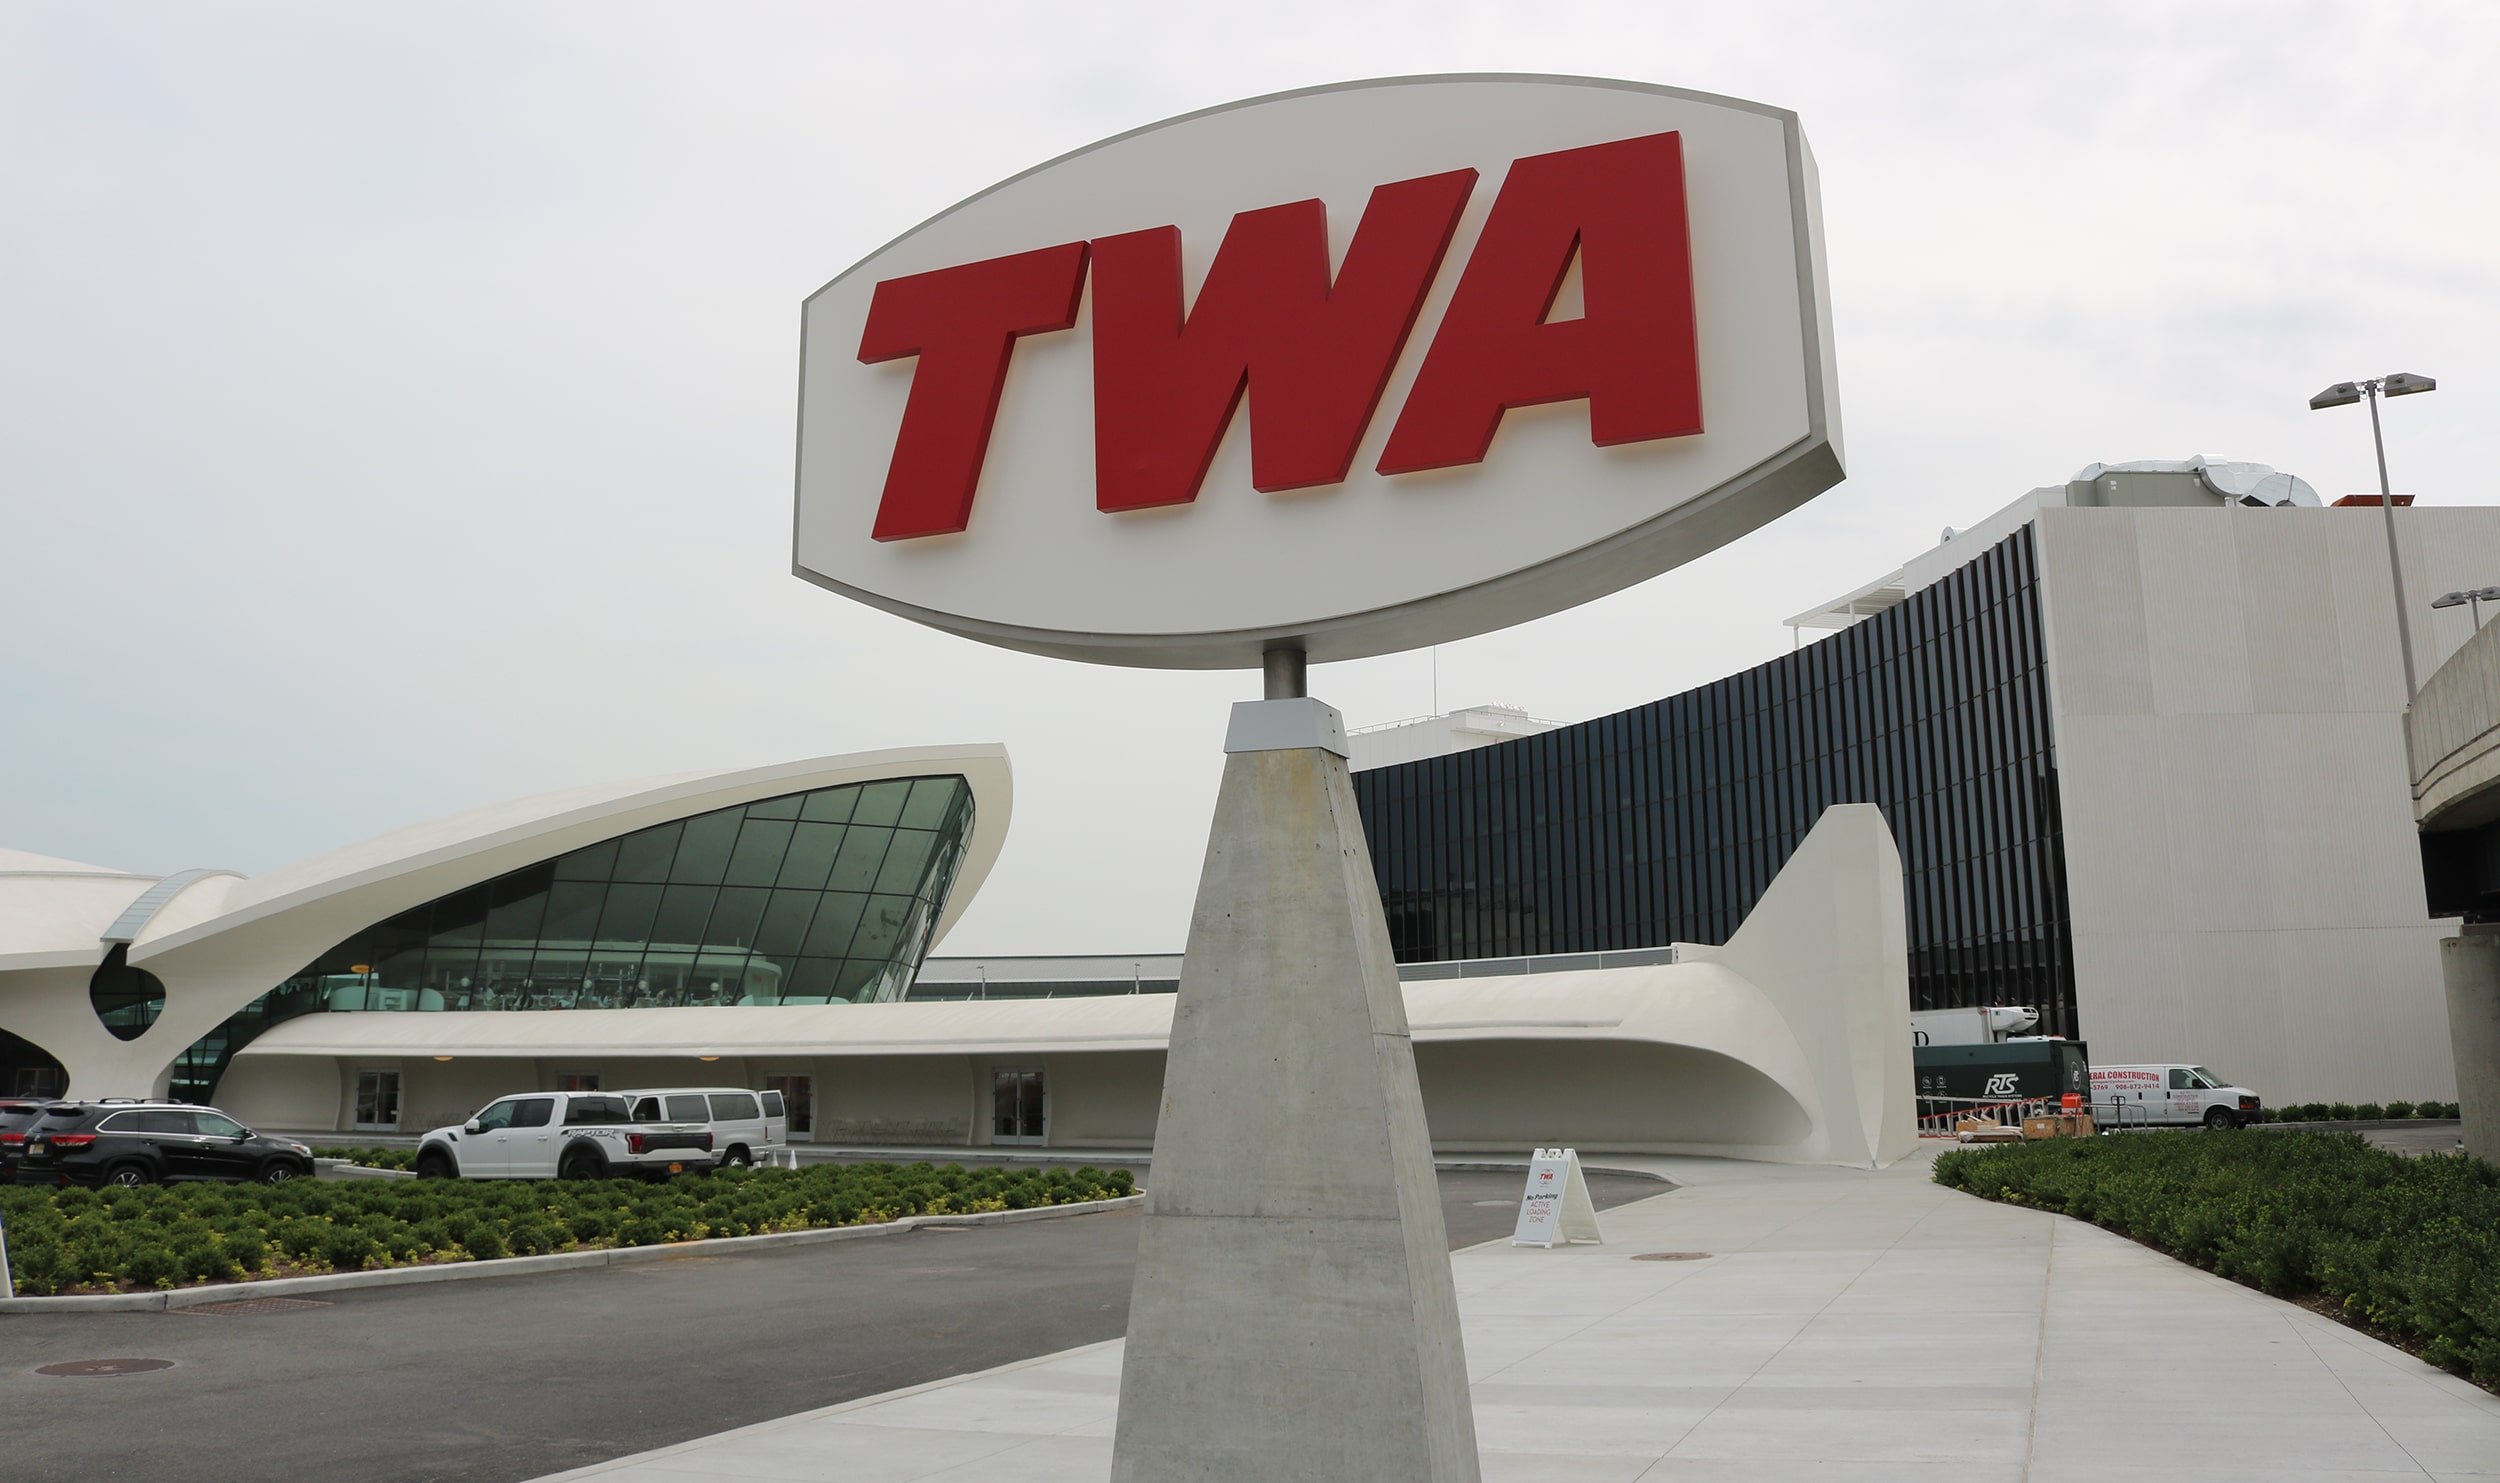 first class
The monument sign for the TWA Hotel blends perfectly with the ’60s surroundings.